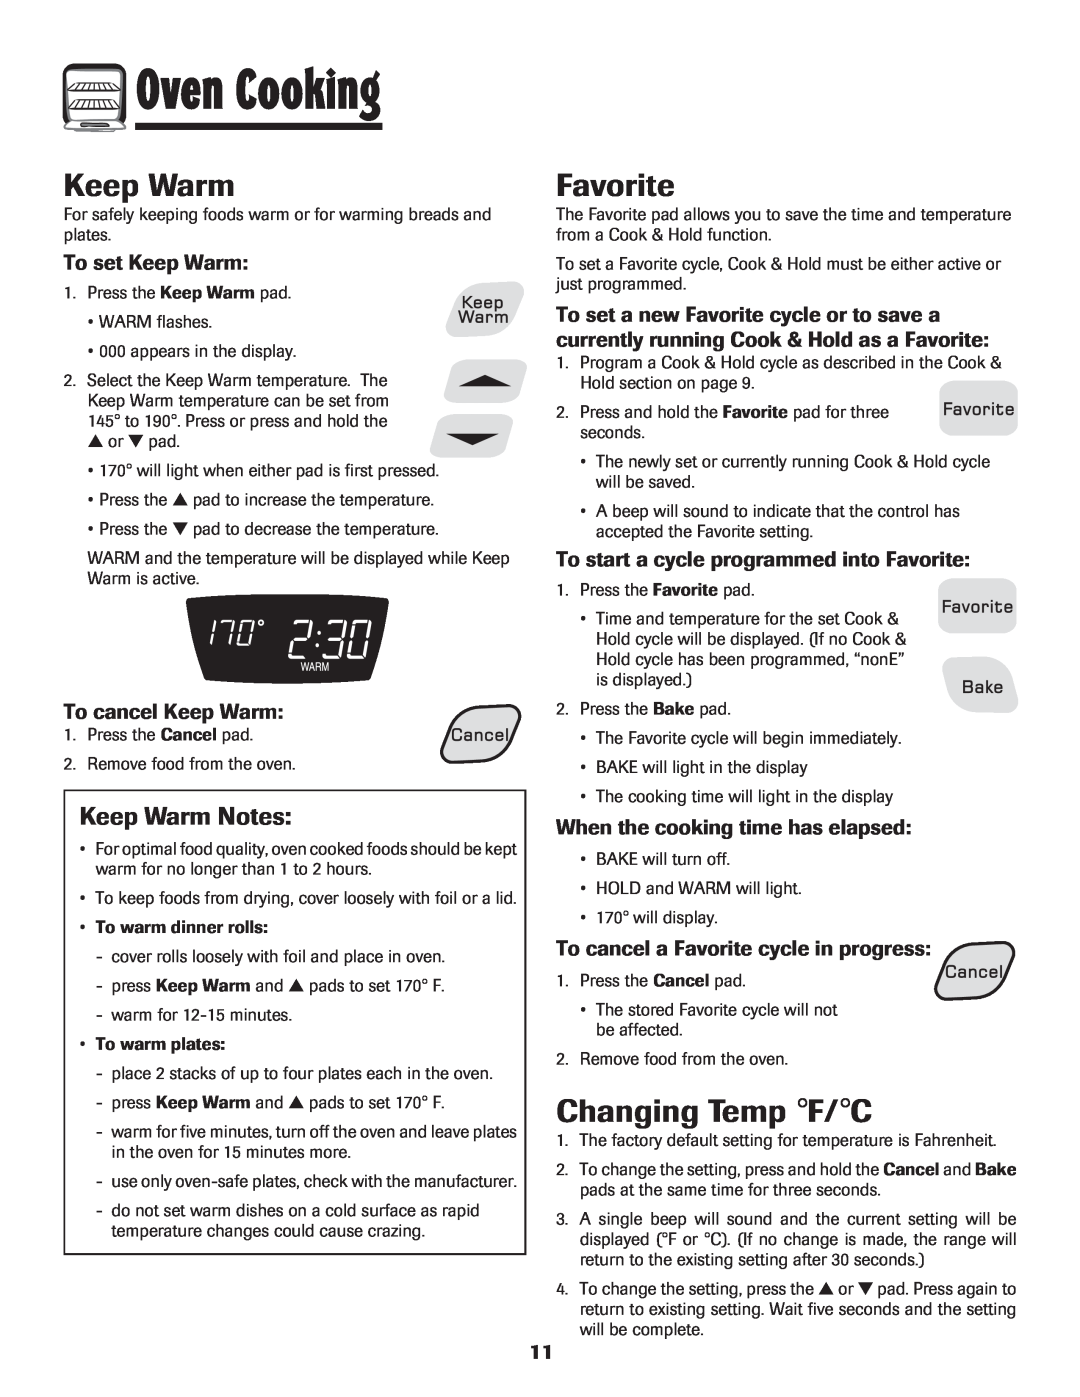 Amana 8113P598-60 Favorite, Changing Temp F/C, Keep Warm Notes, To set Keep Warm, To cancel Keep Warm, Oven Cooking 